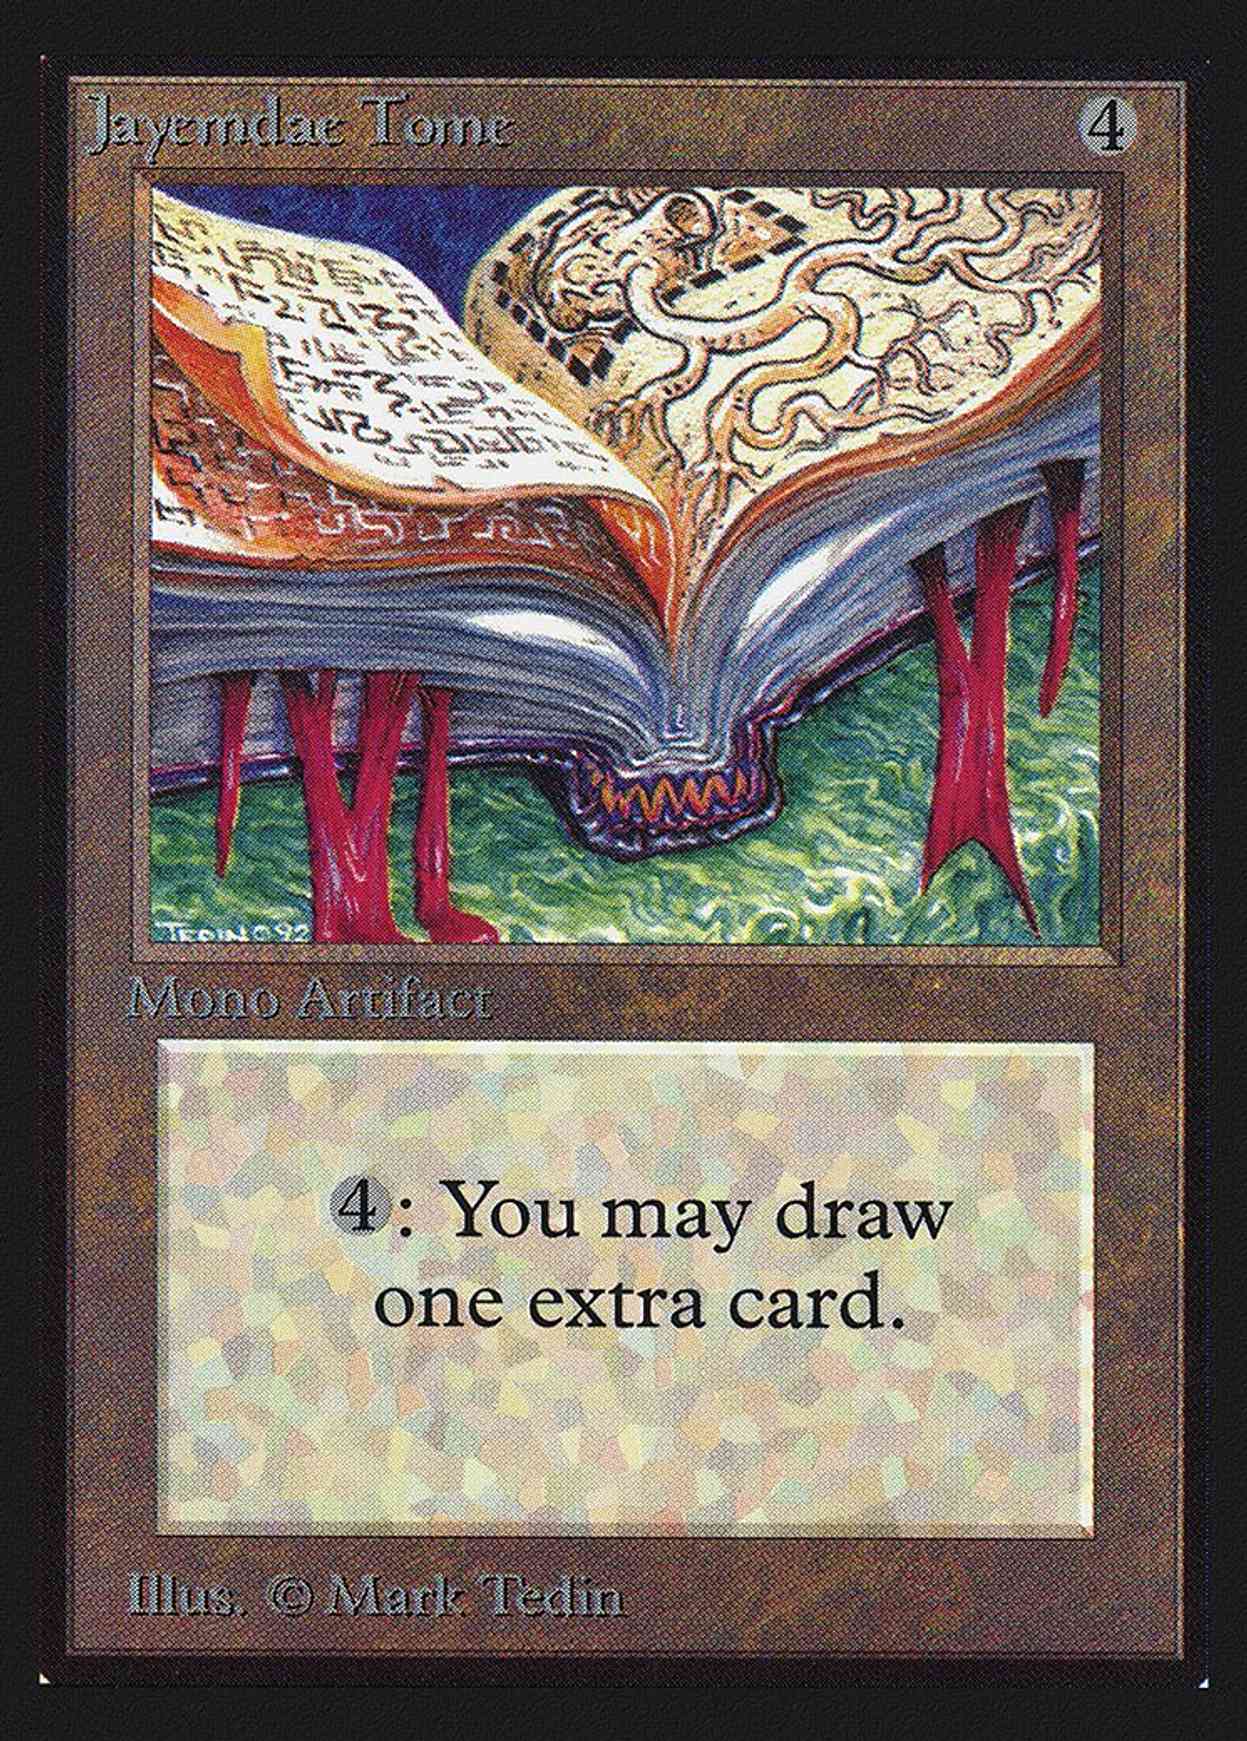 Jayemdae Tome (CE) magic card front